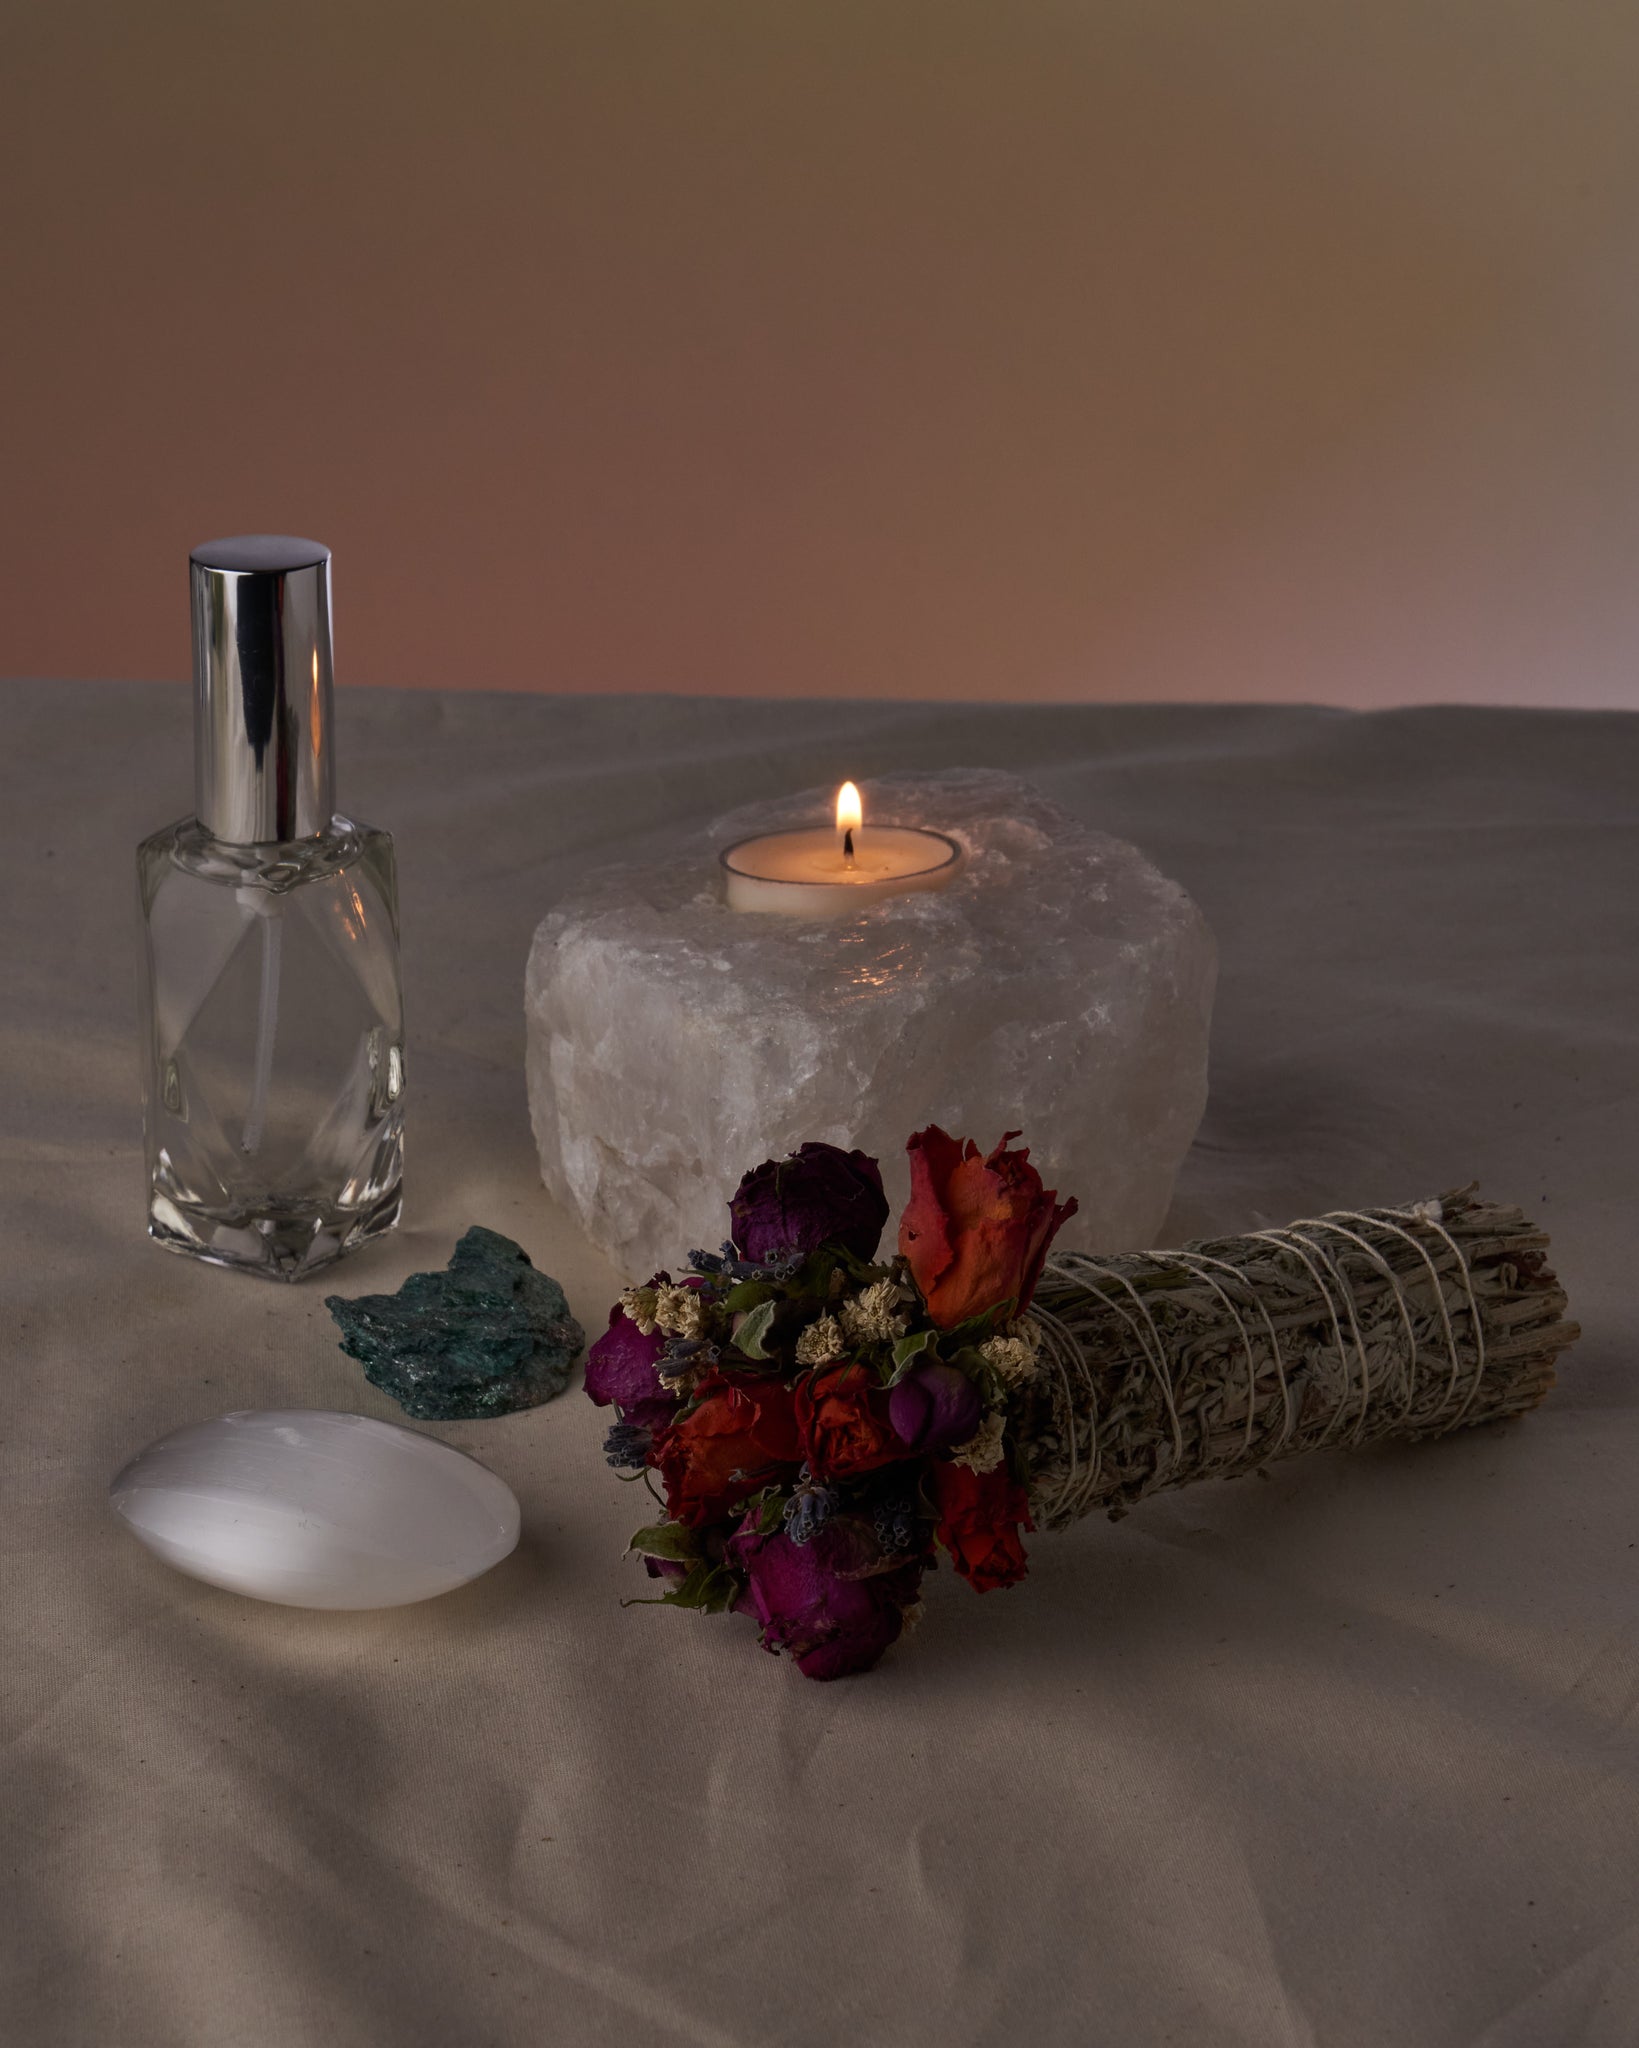 Experience the Power of Ancestral Connection with Our Ancestral Altar + Veneration Kit - A Toolkit for Spiritual Growth and Protection.